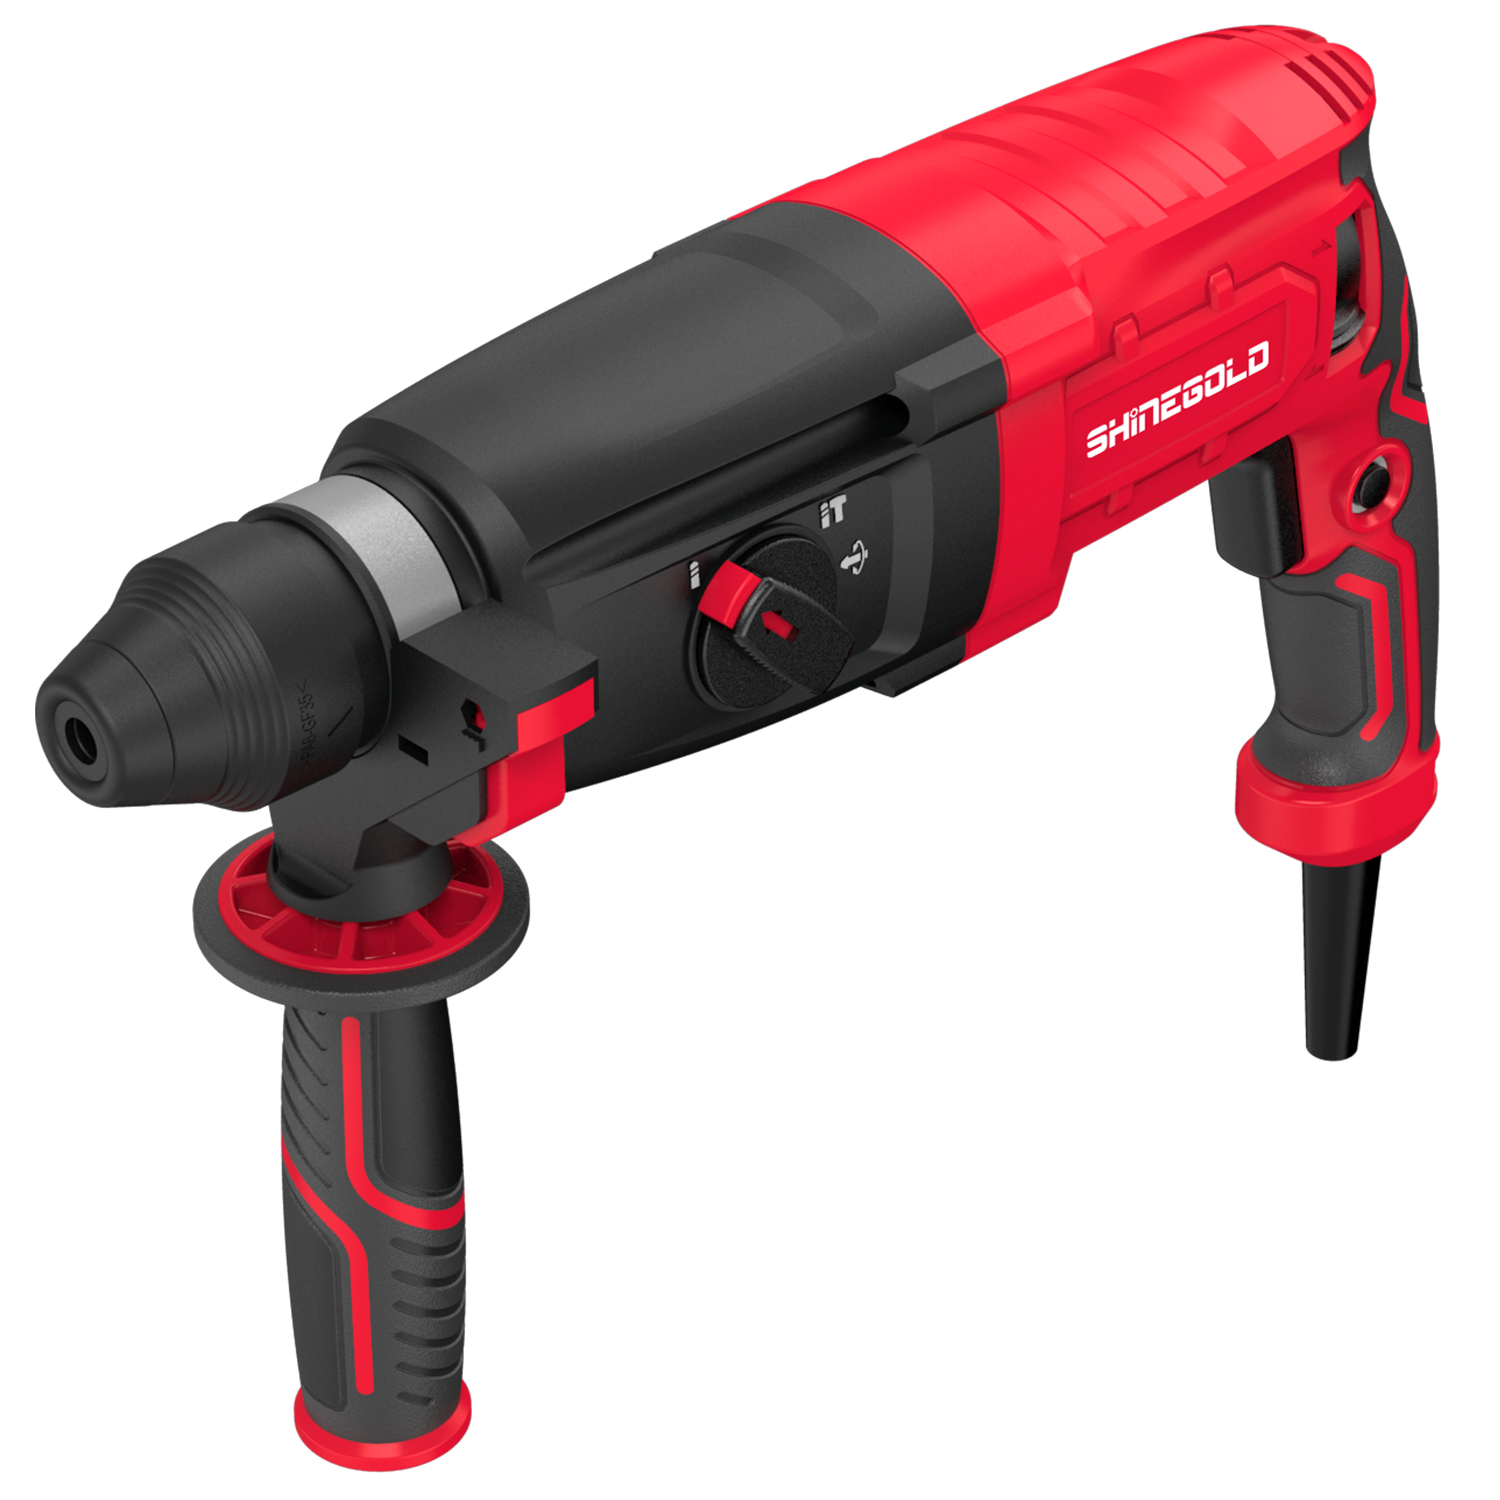 Can an impact driver be used as a drill?